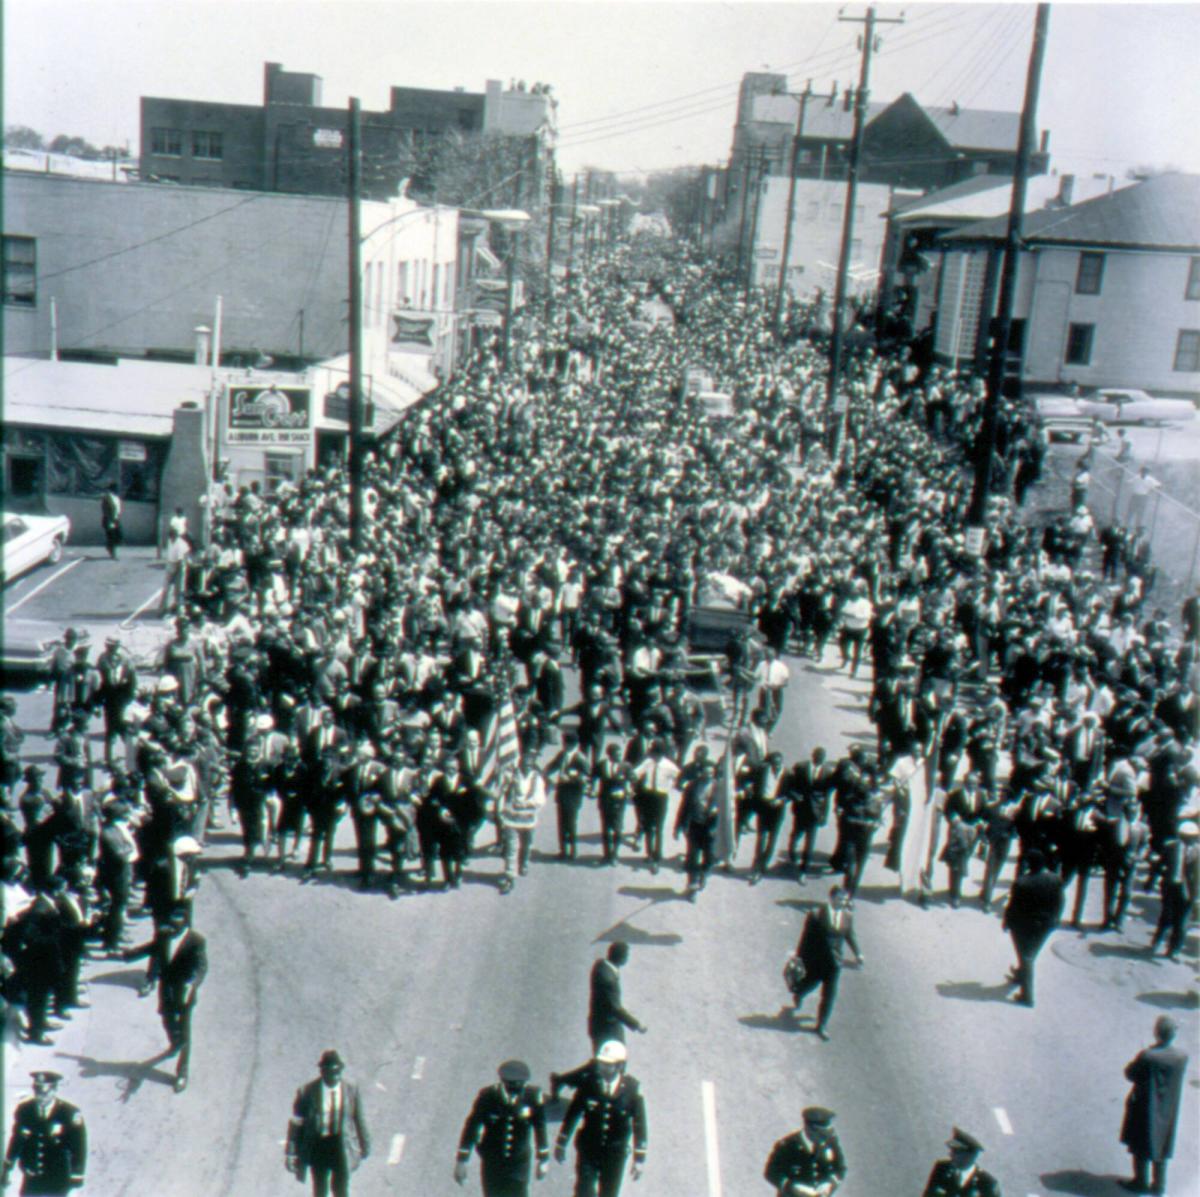 Martin Luther King Funeral Procession: Funeral Procession for Dr. Martin Luther King on Auburn Avenue after leaving King's church, Atlanta, Georgia, April 12th 1968, from the portfolio I am a Man